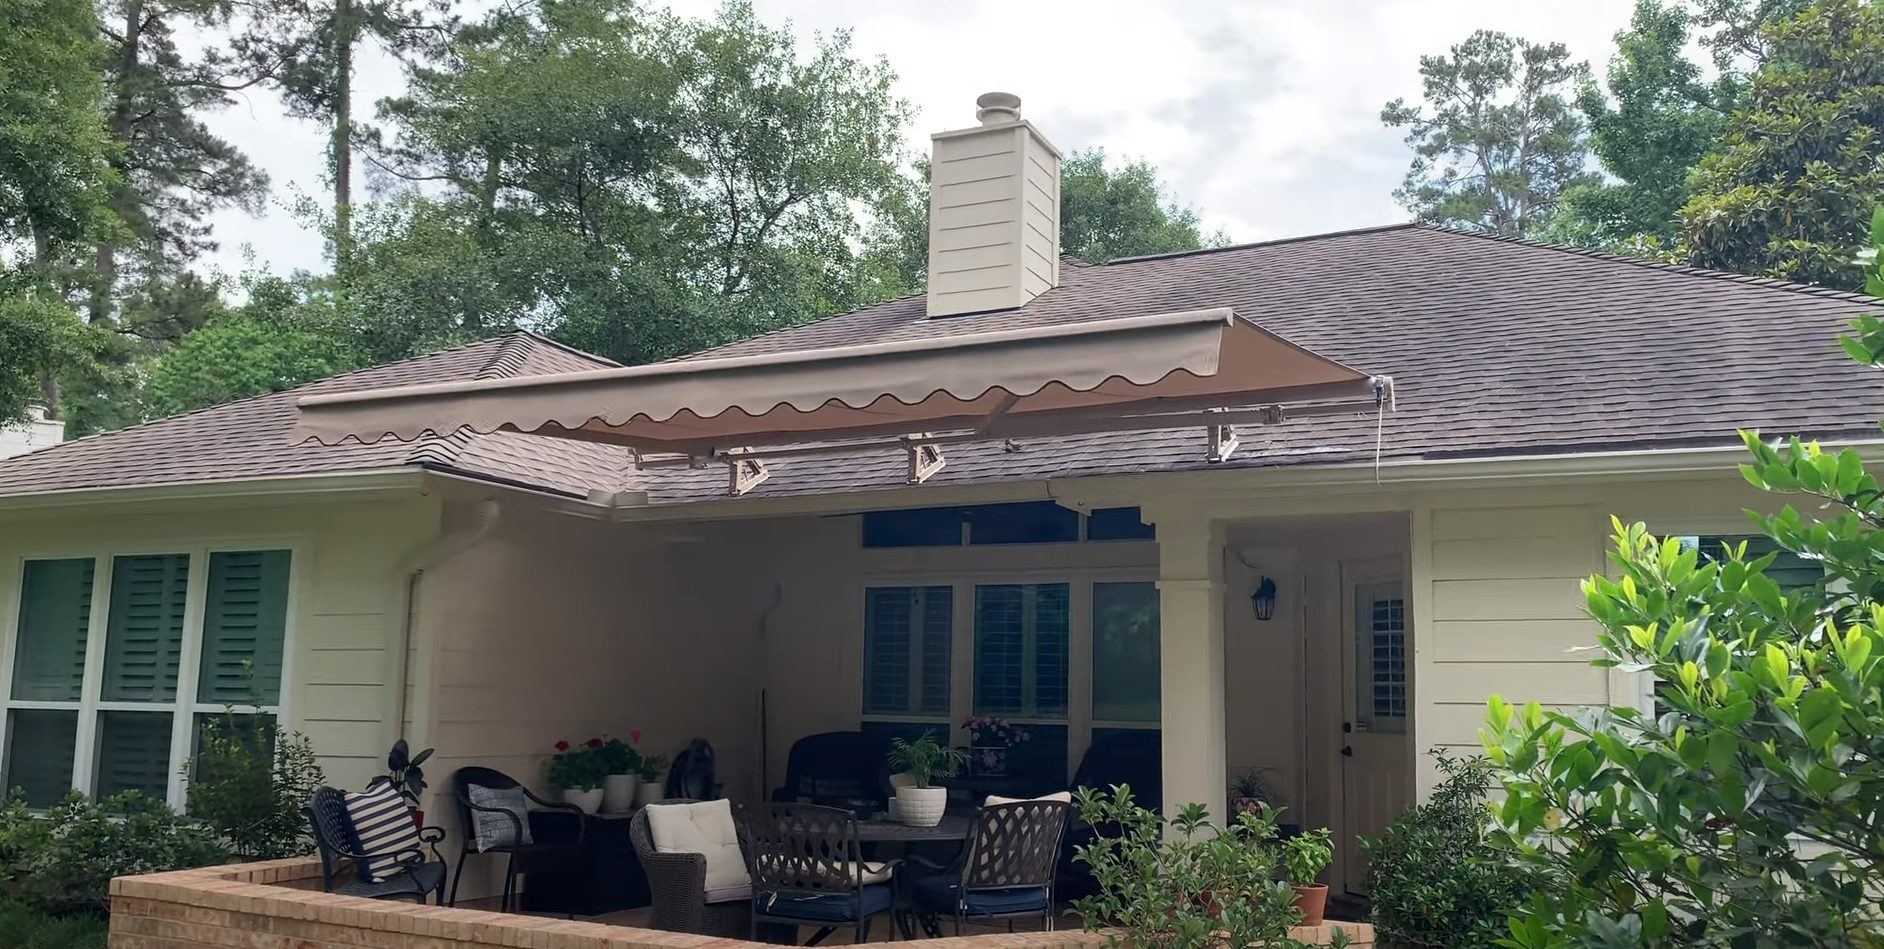 Home with an awning in Texas